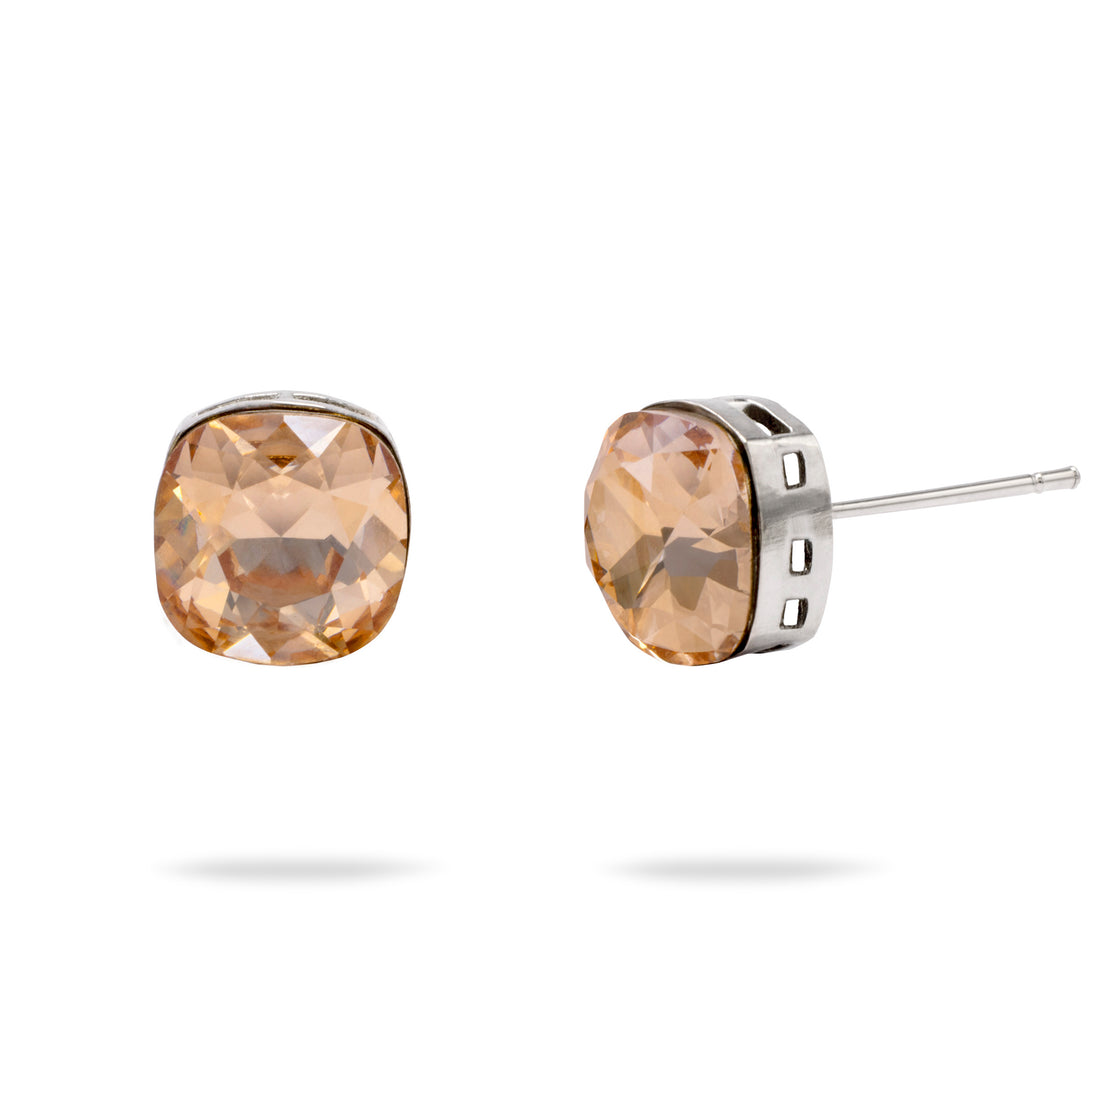 Exquisite Champagne Cushion Cut Stud Earrings